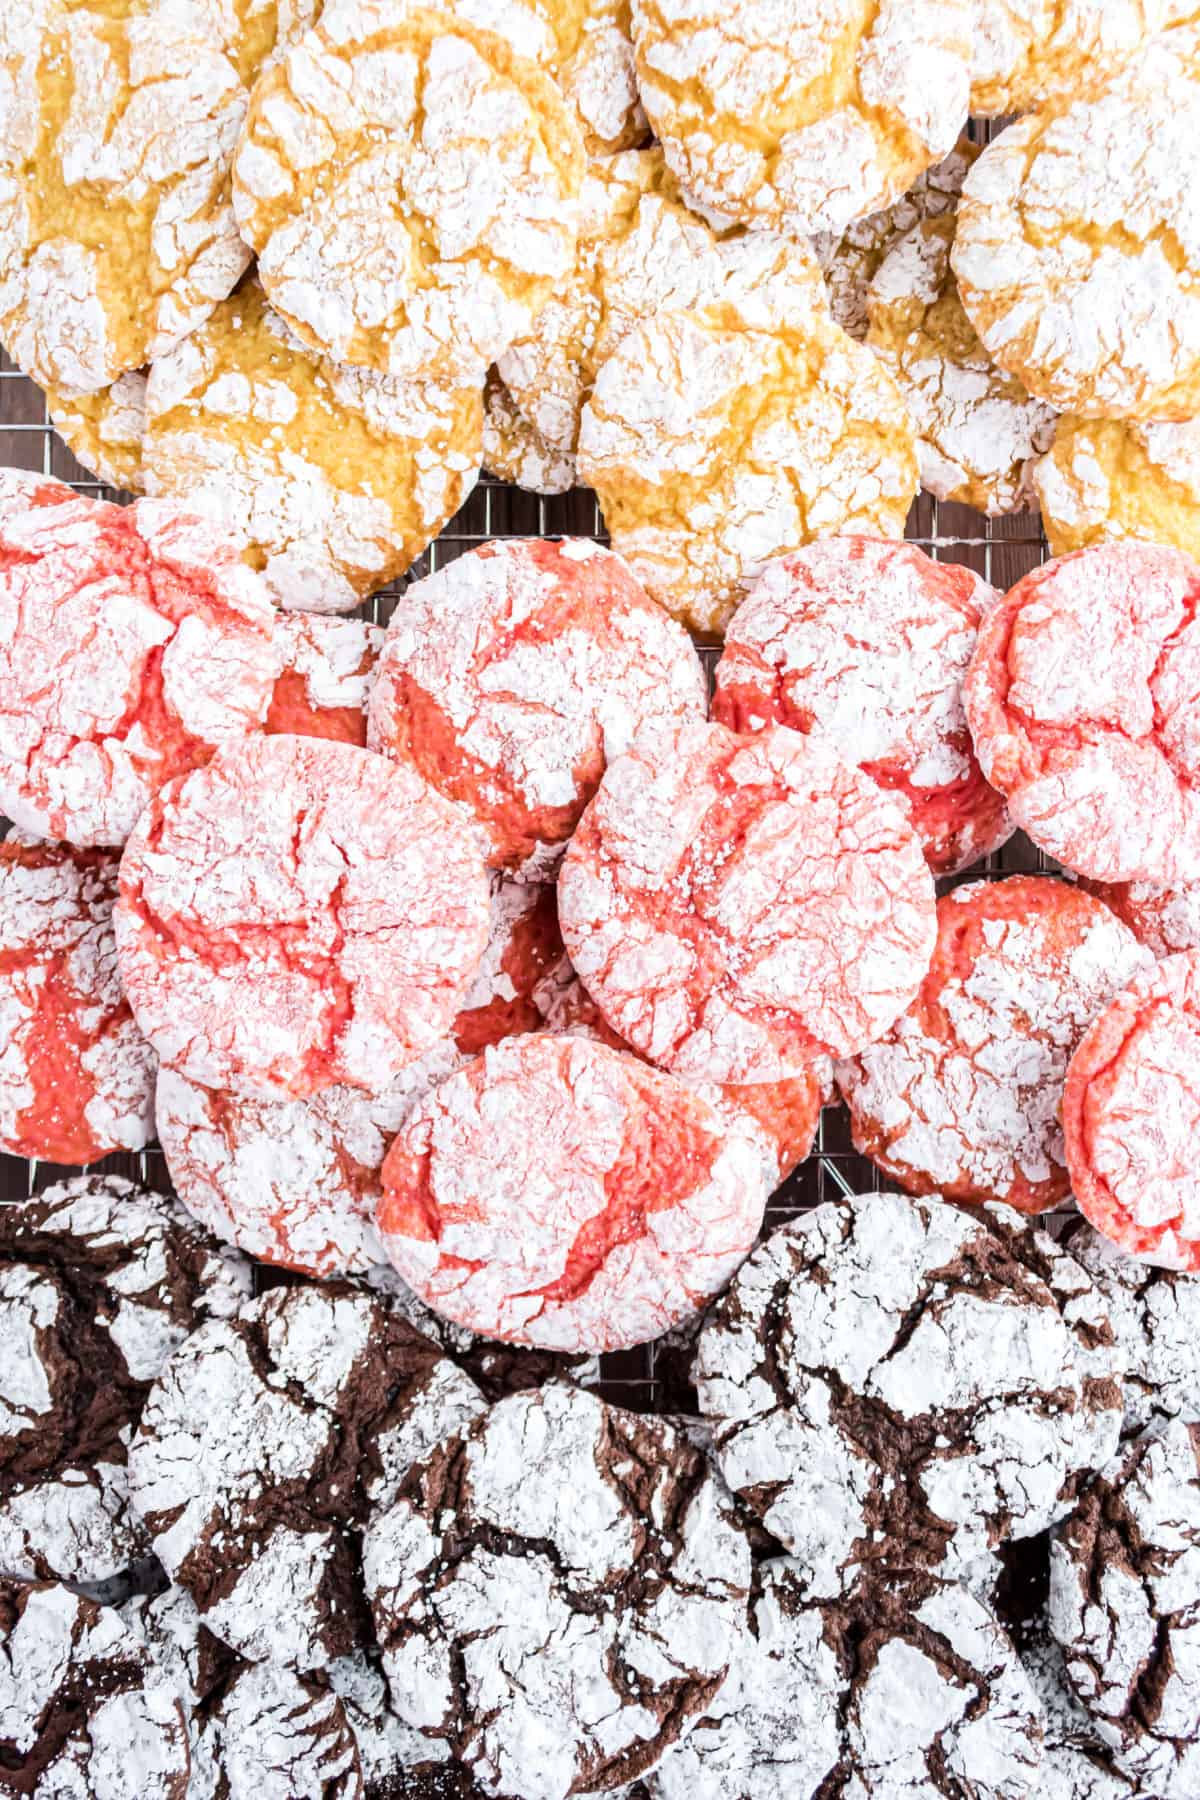 Lemon, Strawberry, and Chocolate crinkle cookies stacked.